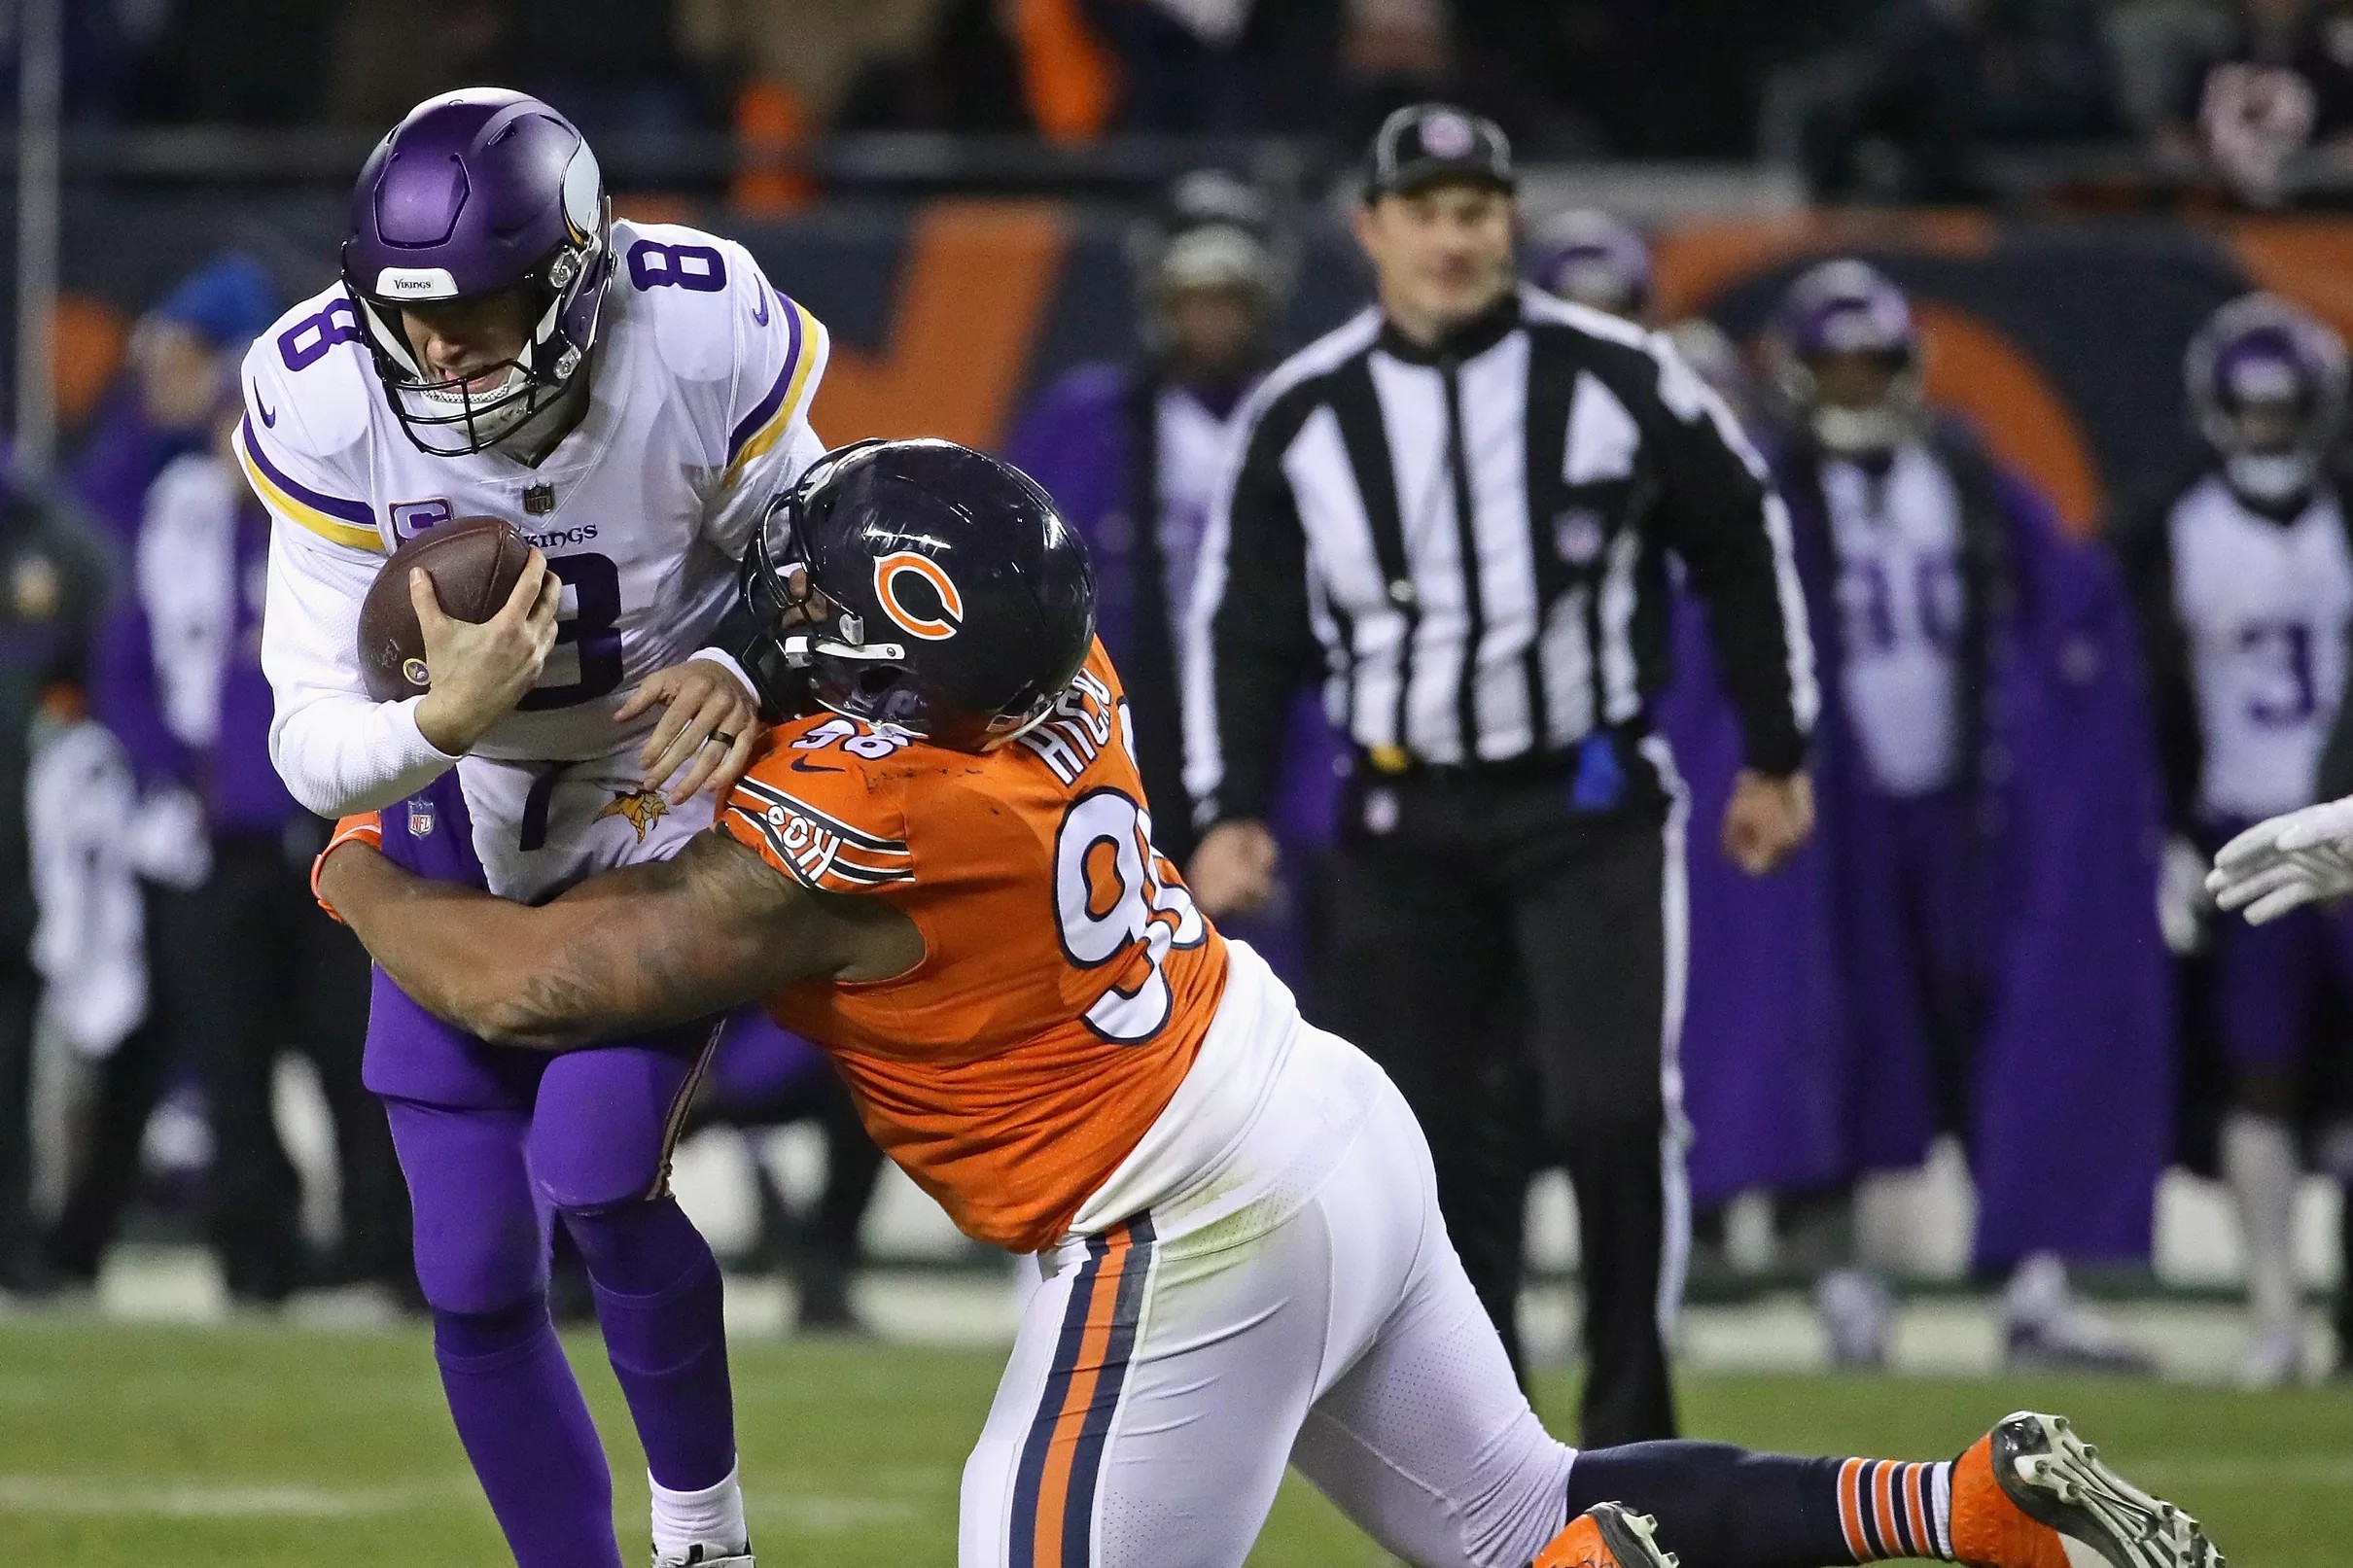 Bears vs. Vikings: Notes from a tough 25-20 victory